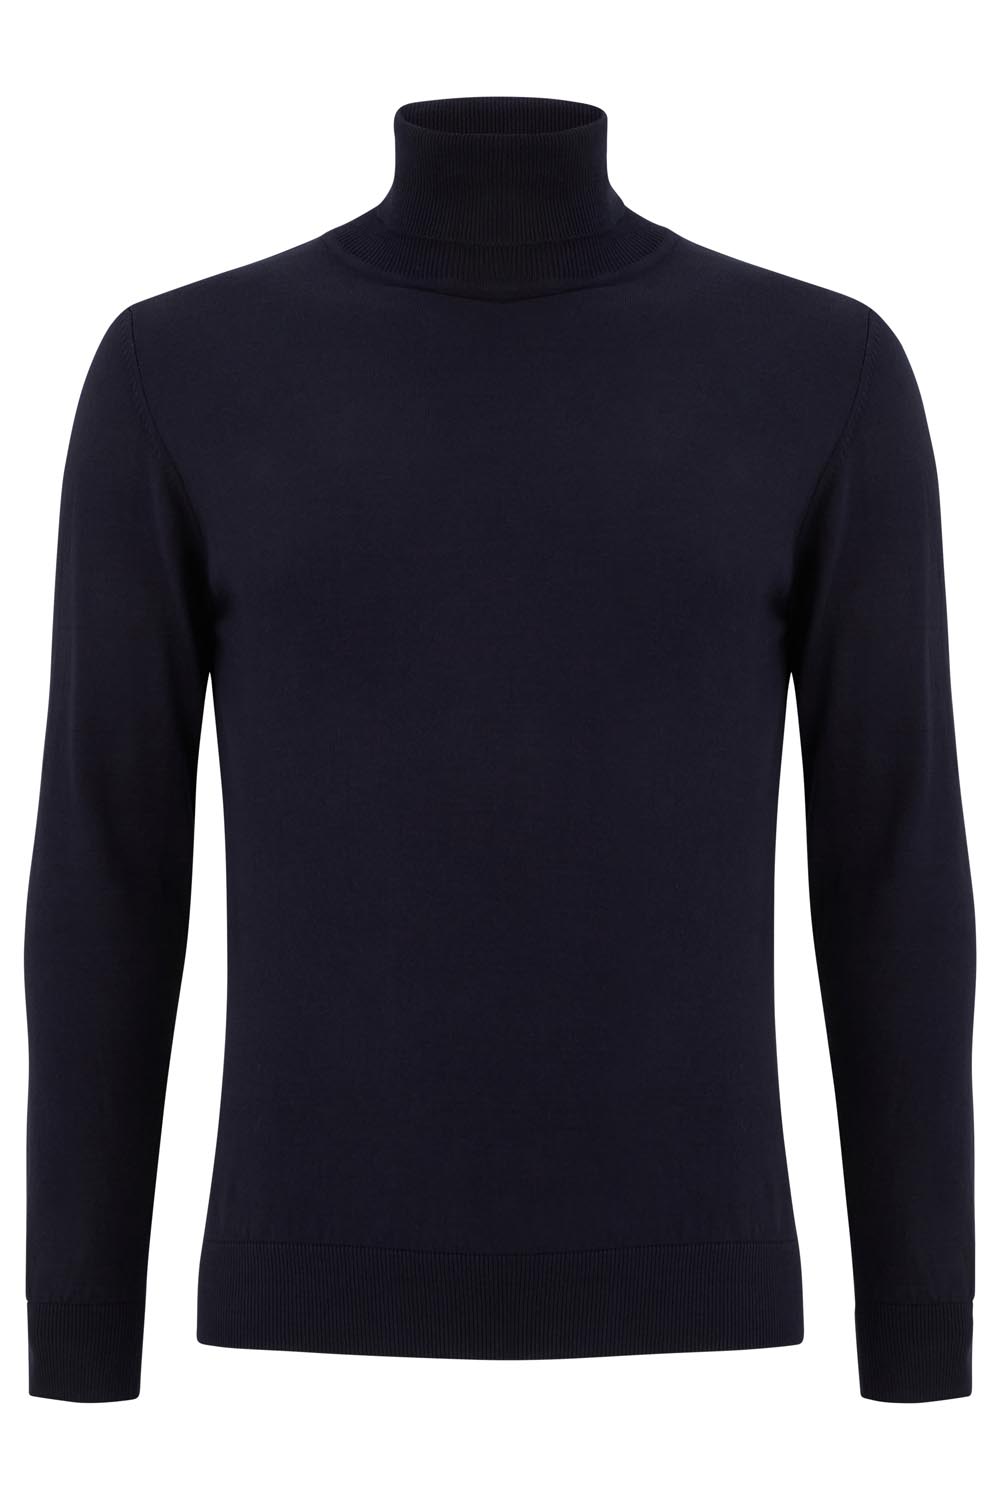 Dax Navy Rollneck Sweater - Tom Murphy's Formal and Menswear